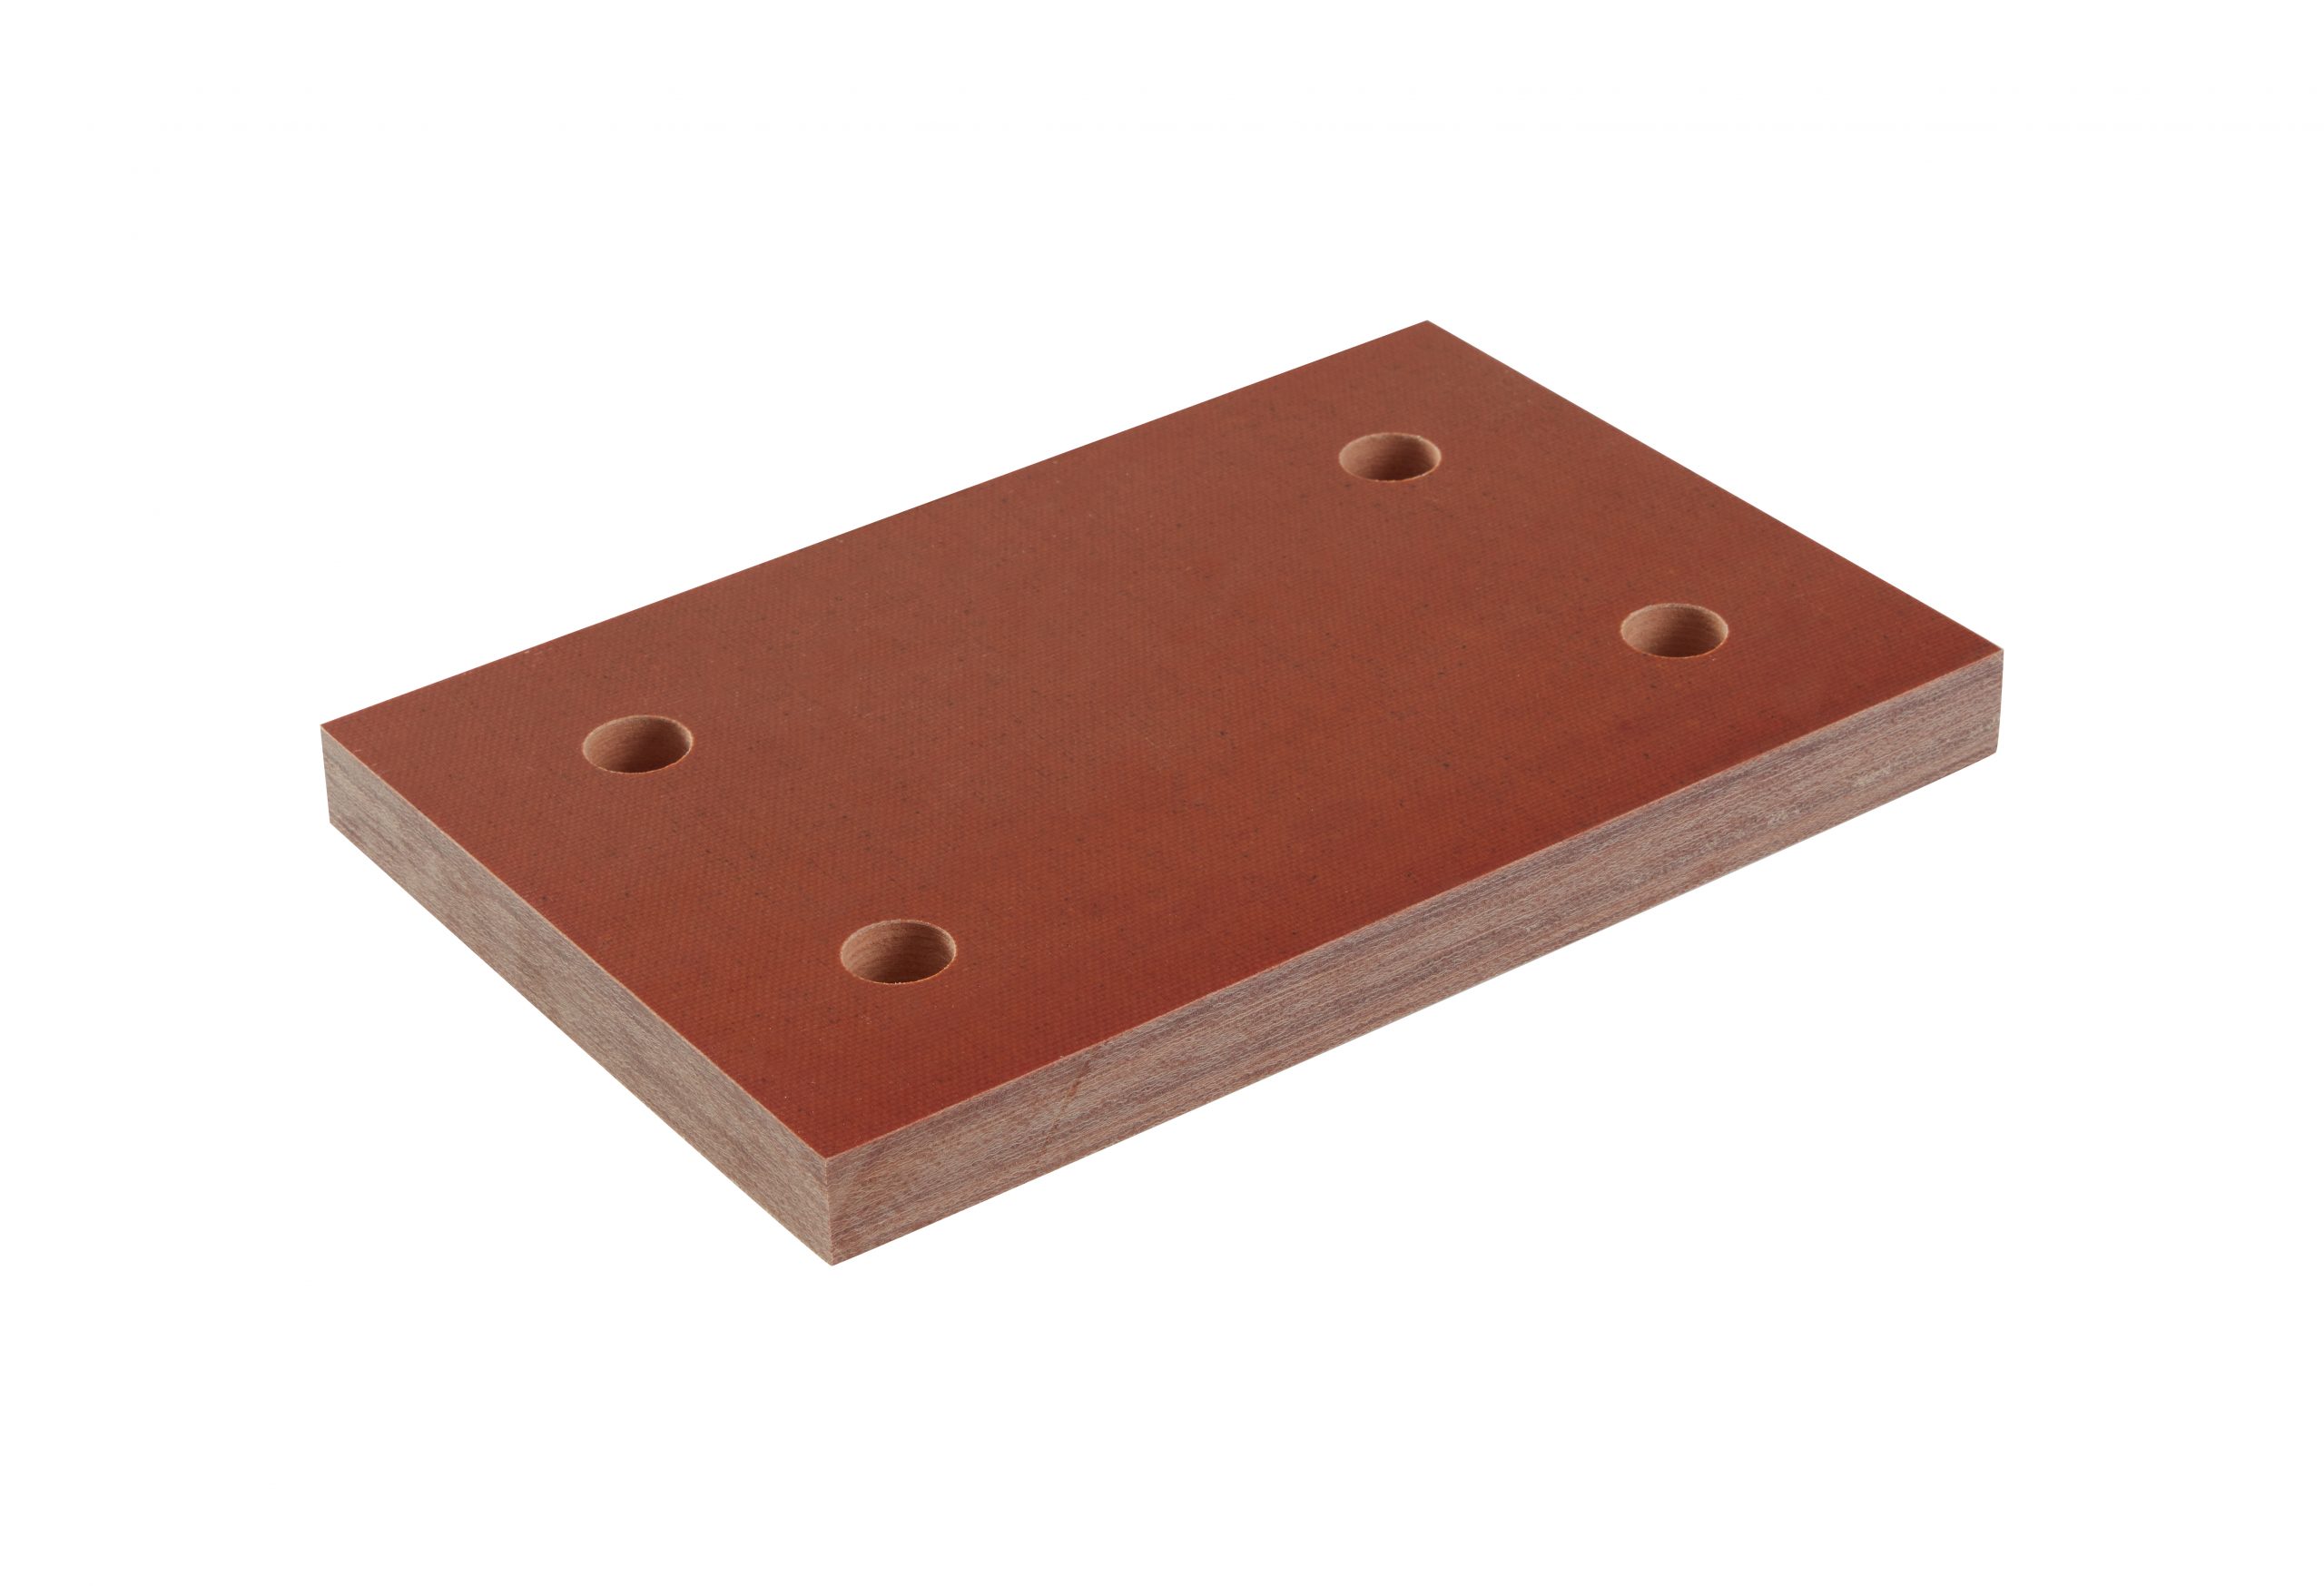 Details about   ARMATHERM FRR STRUCTURAL THERMAL BREAK MATERIAL BRIDGING SOLUTIONS 6" X 6" X 1" 